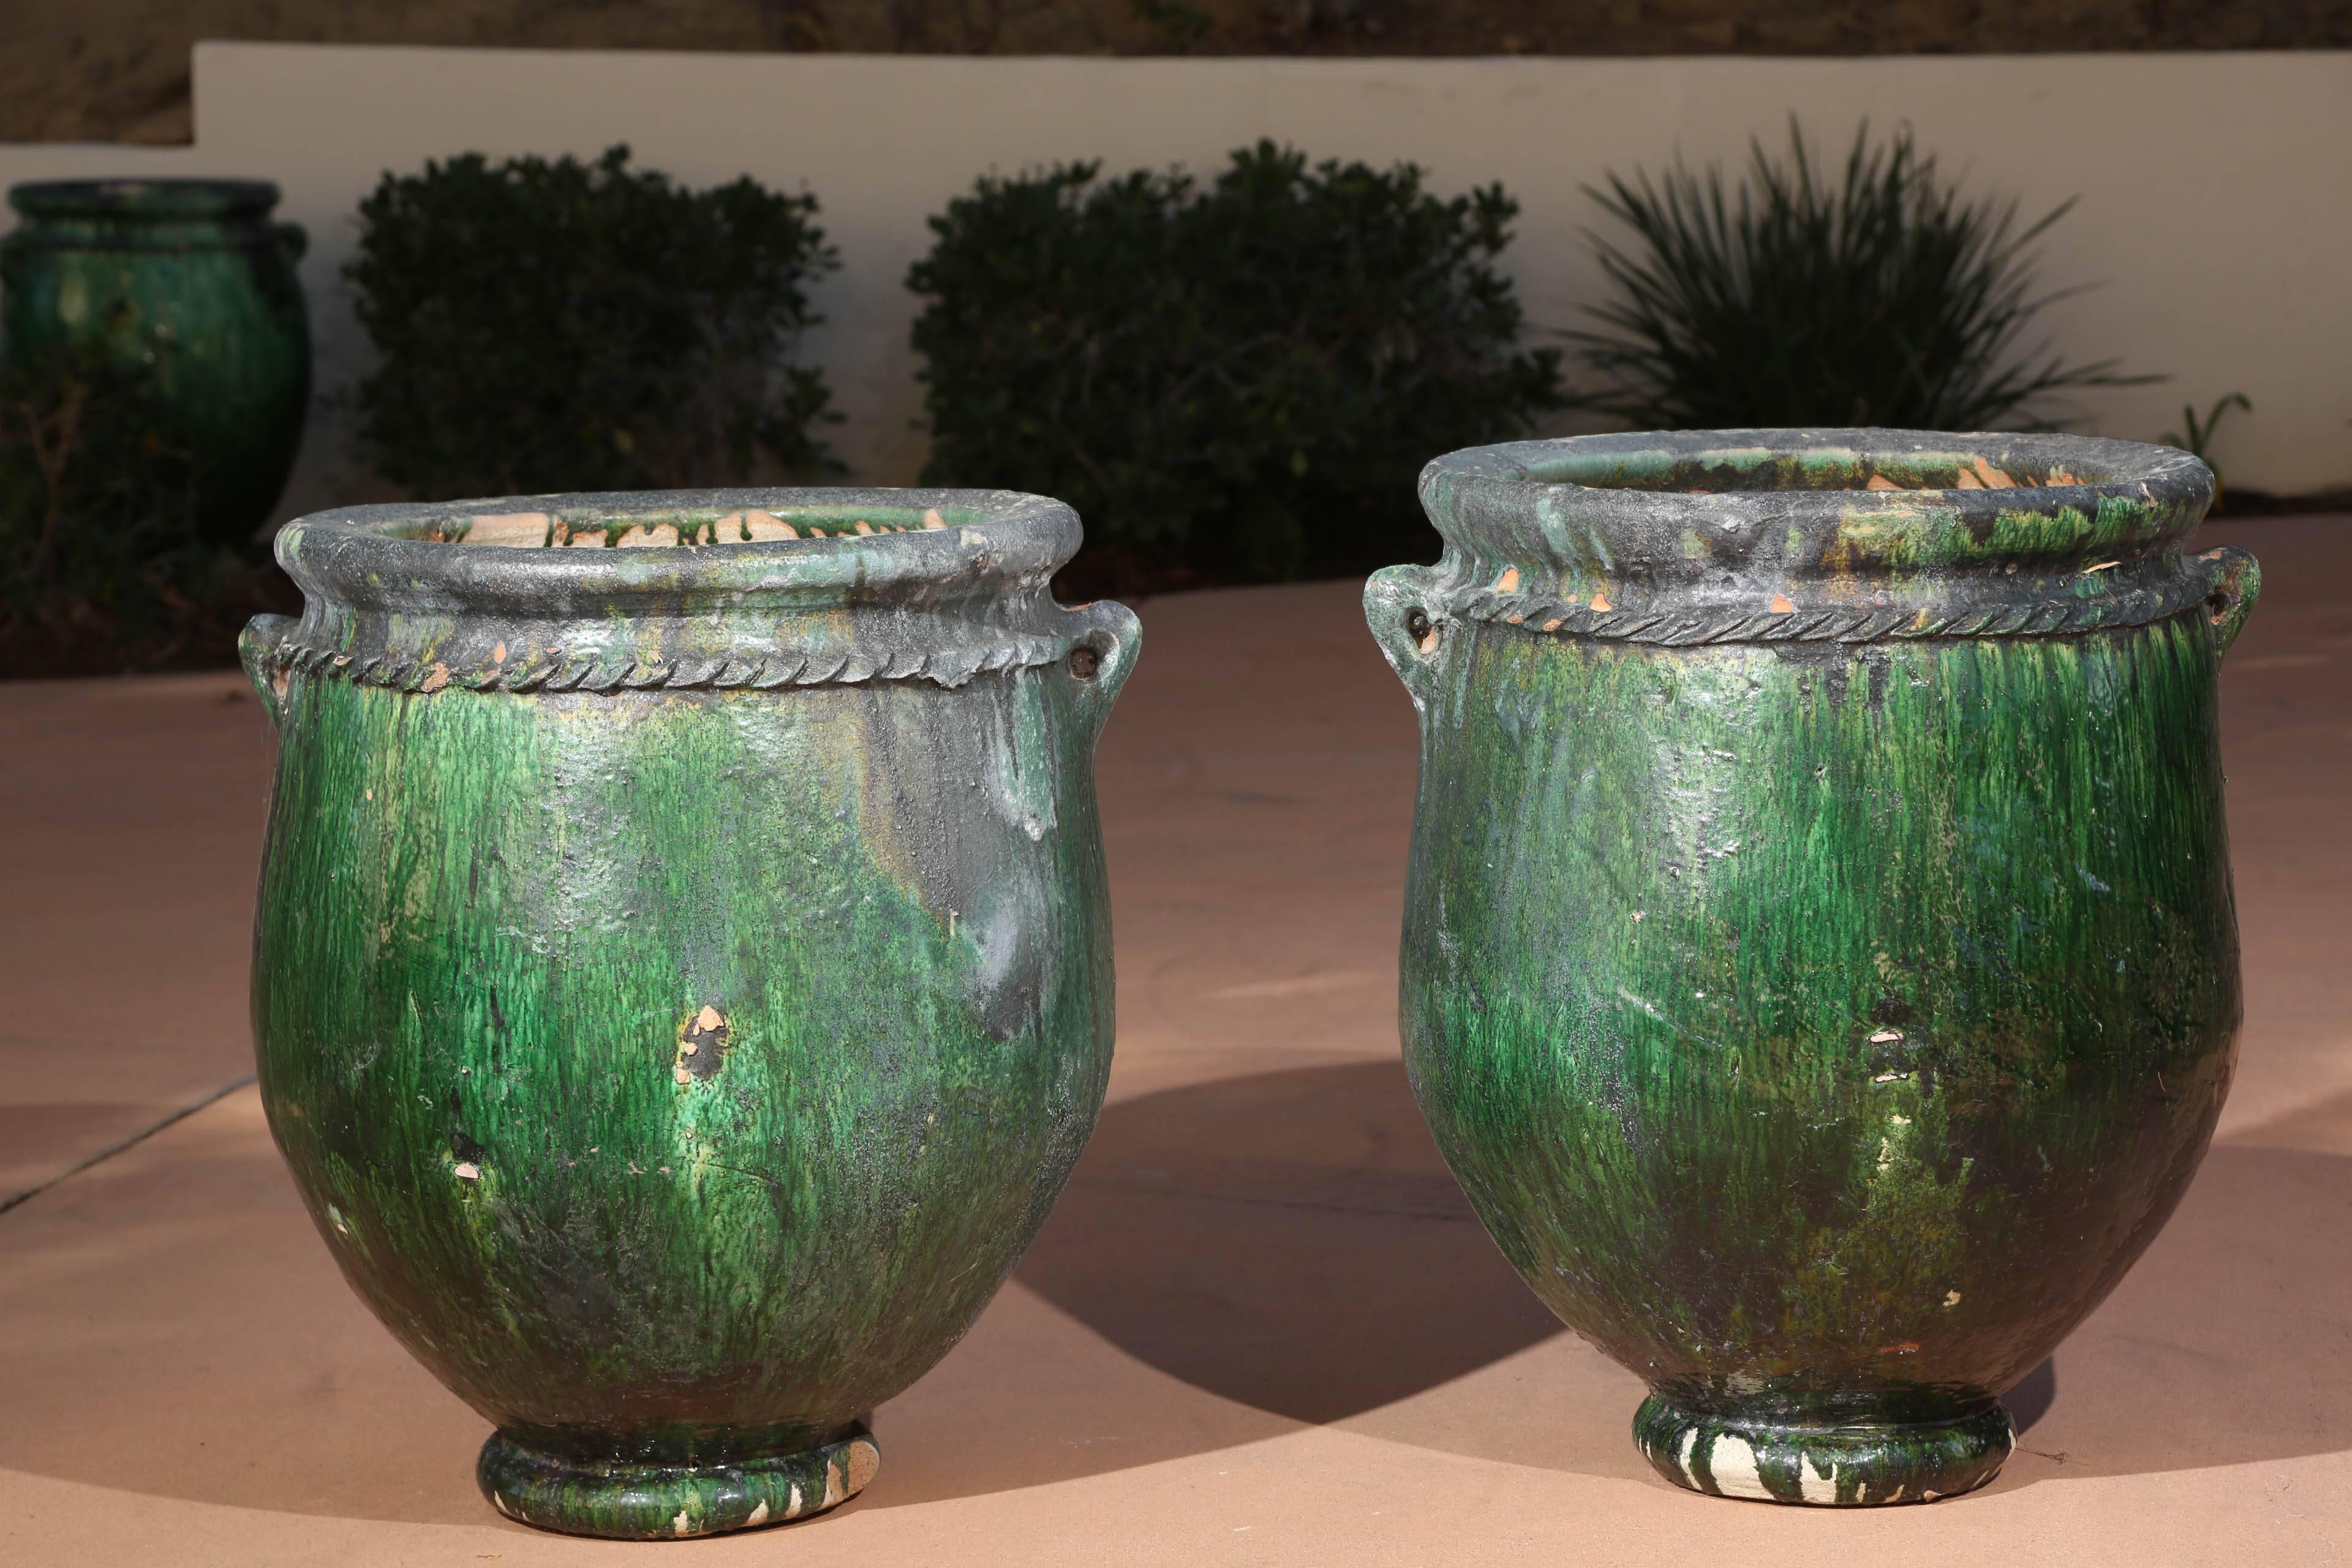 Pair of Large green oversized Moroccan garden planters, olive jars, urns.
Handcrafted in Morocco,  Tamgroute,
Garden ornament planters, great for citrus tree, for indoor or outdoor.
Many more sizes and styles available, each jar is handmade ,